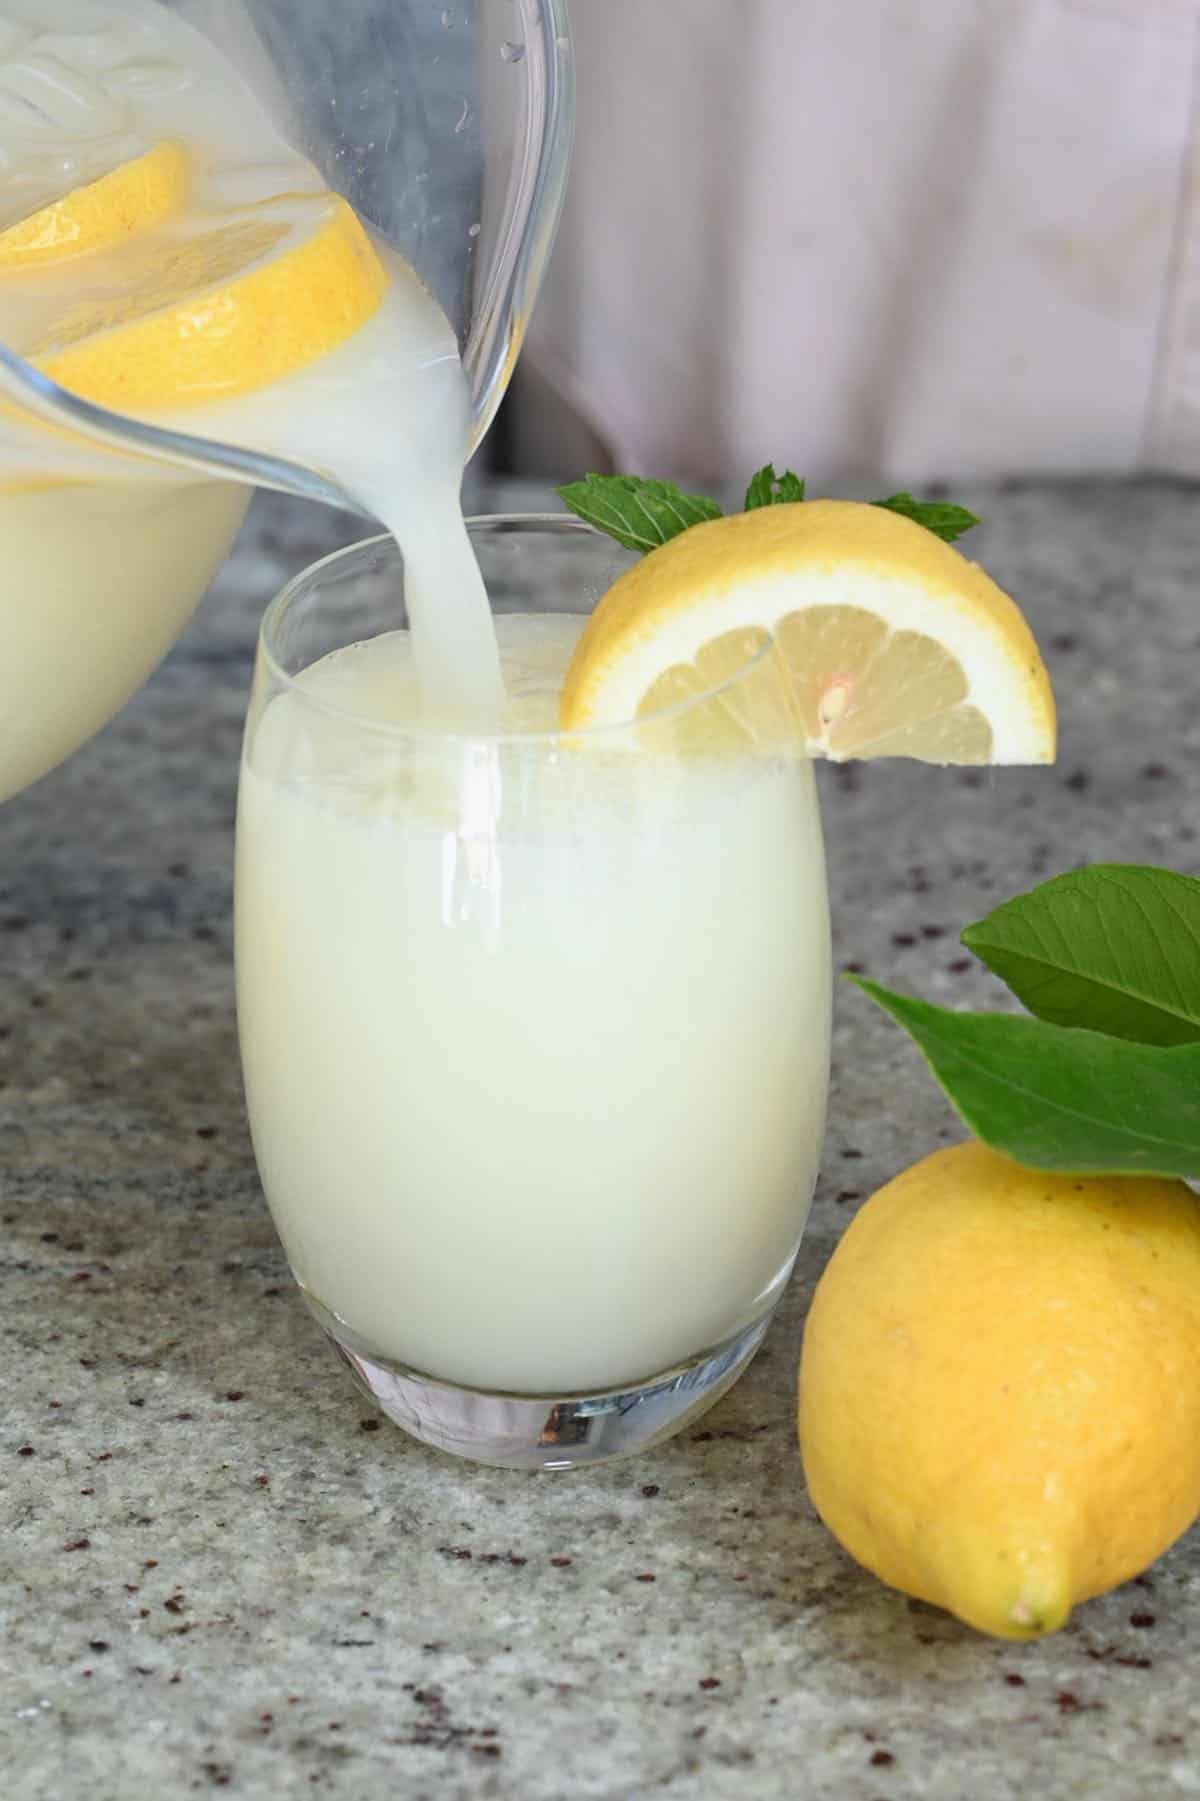 Pouring creamy lemonade in a glass